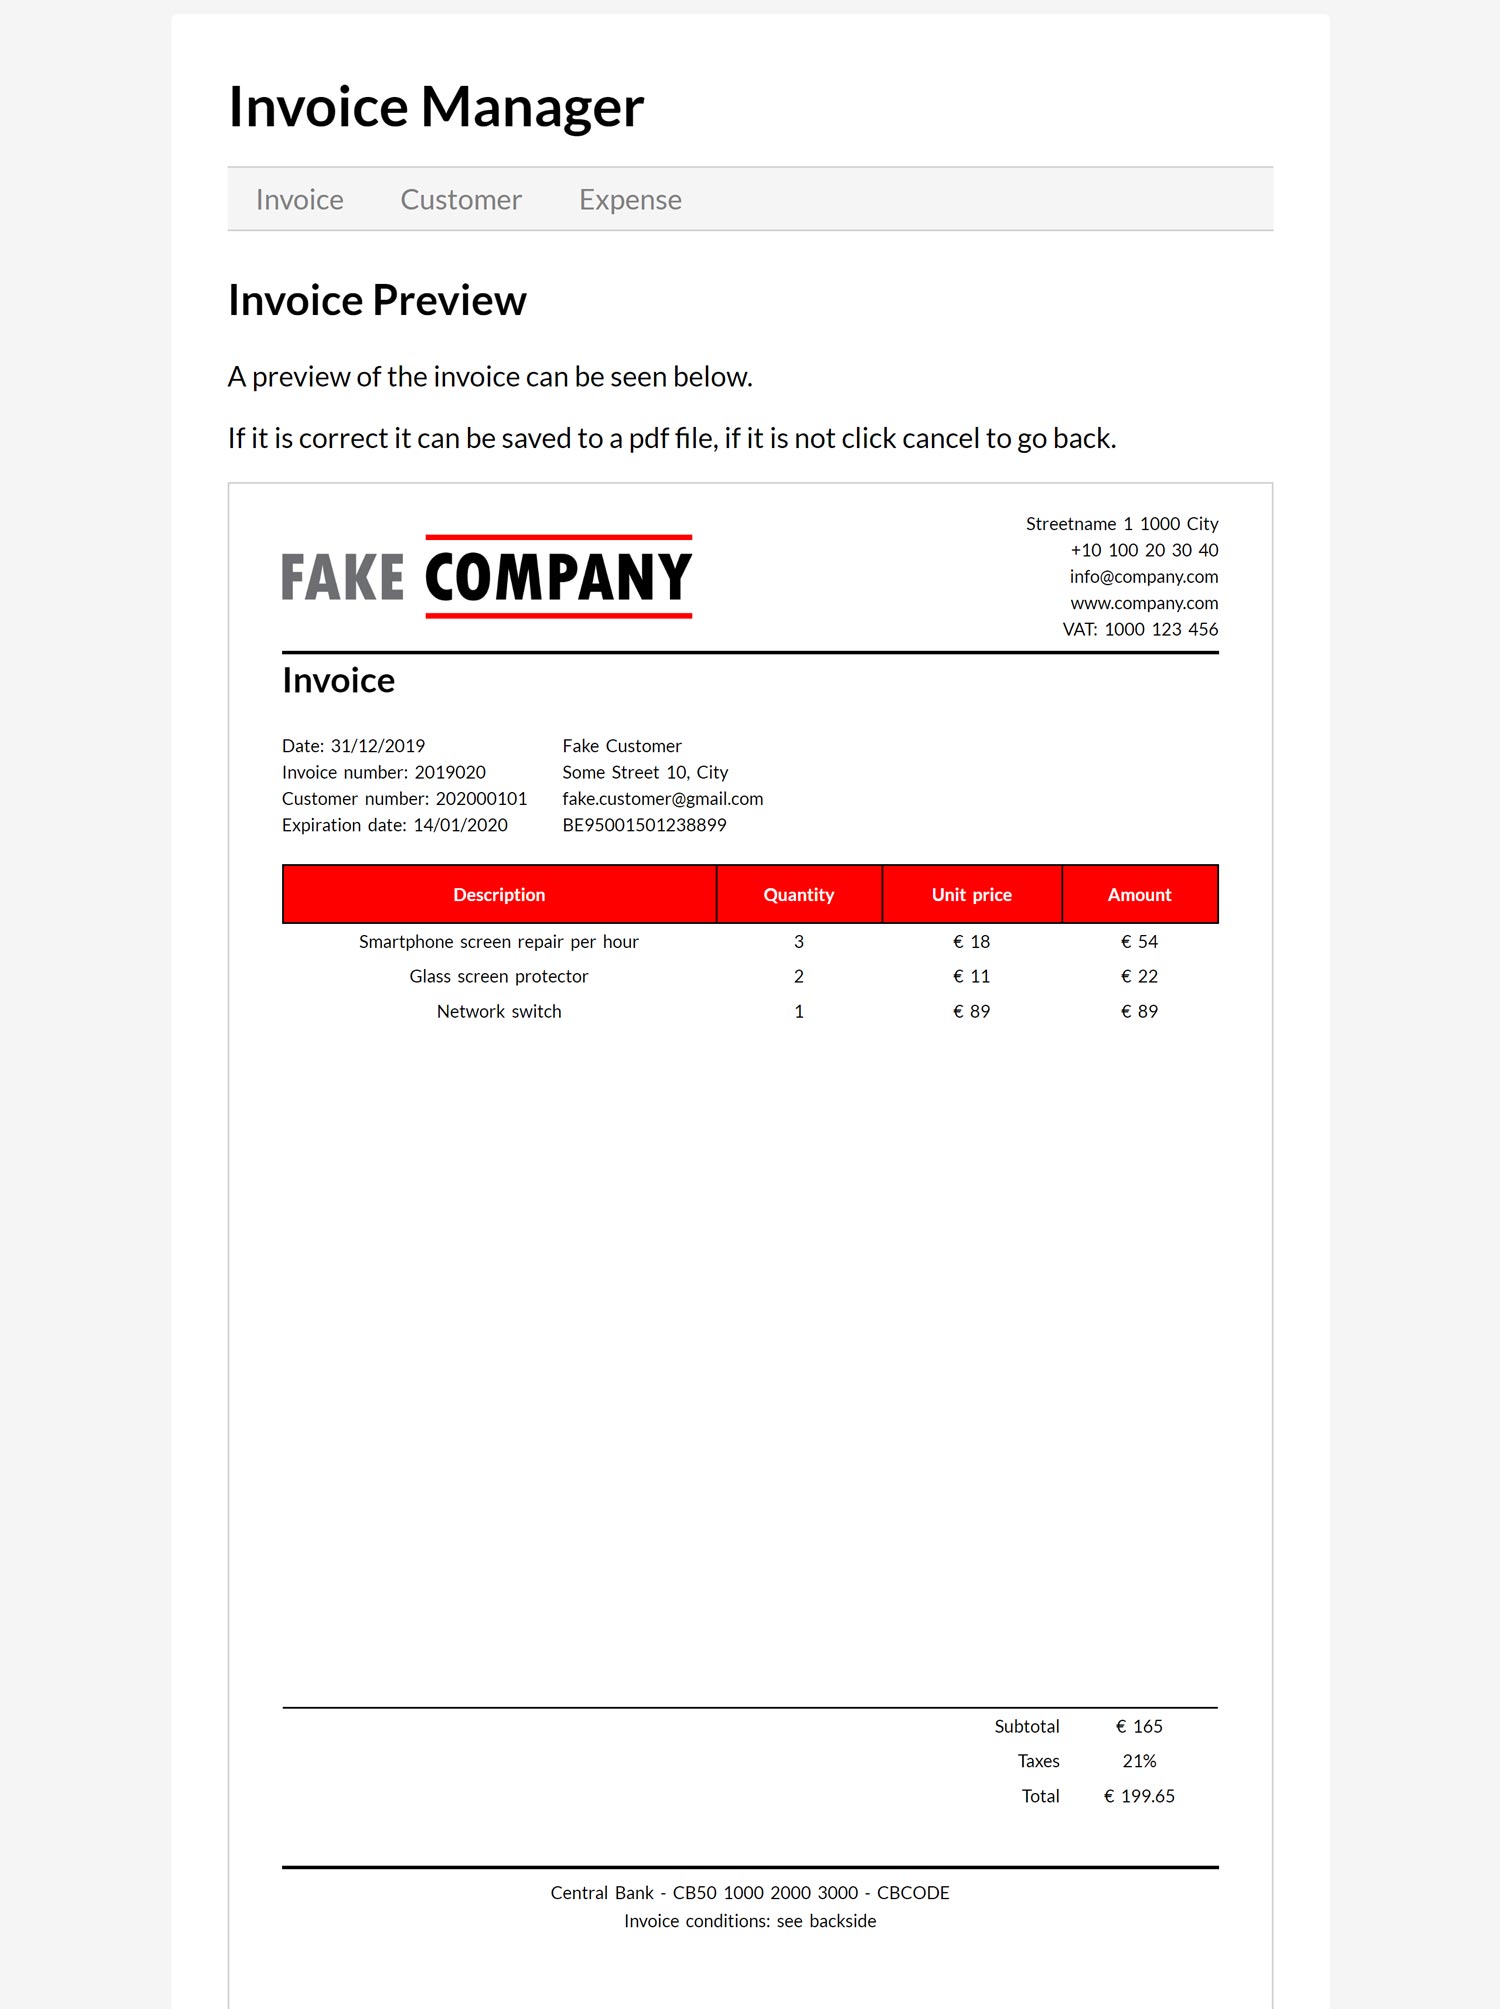 invoice manager pdf preview page